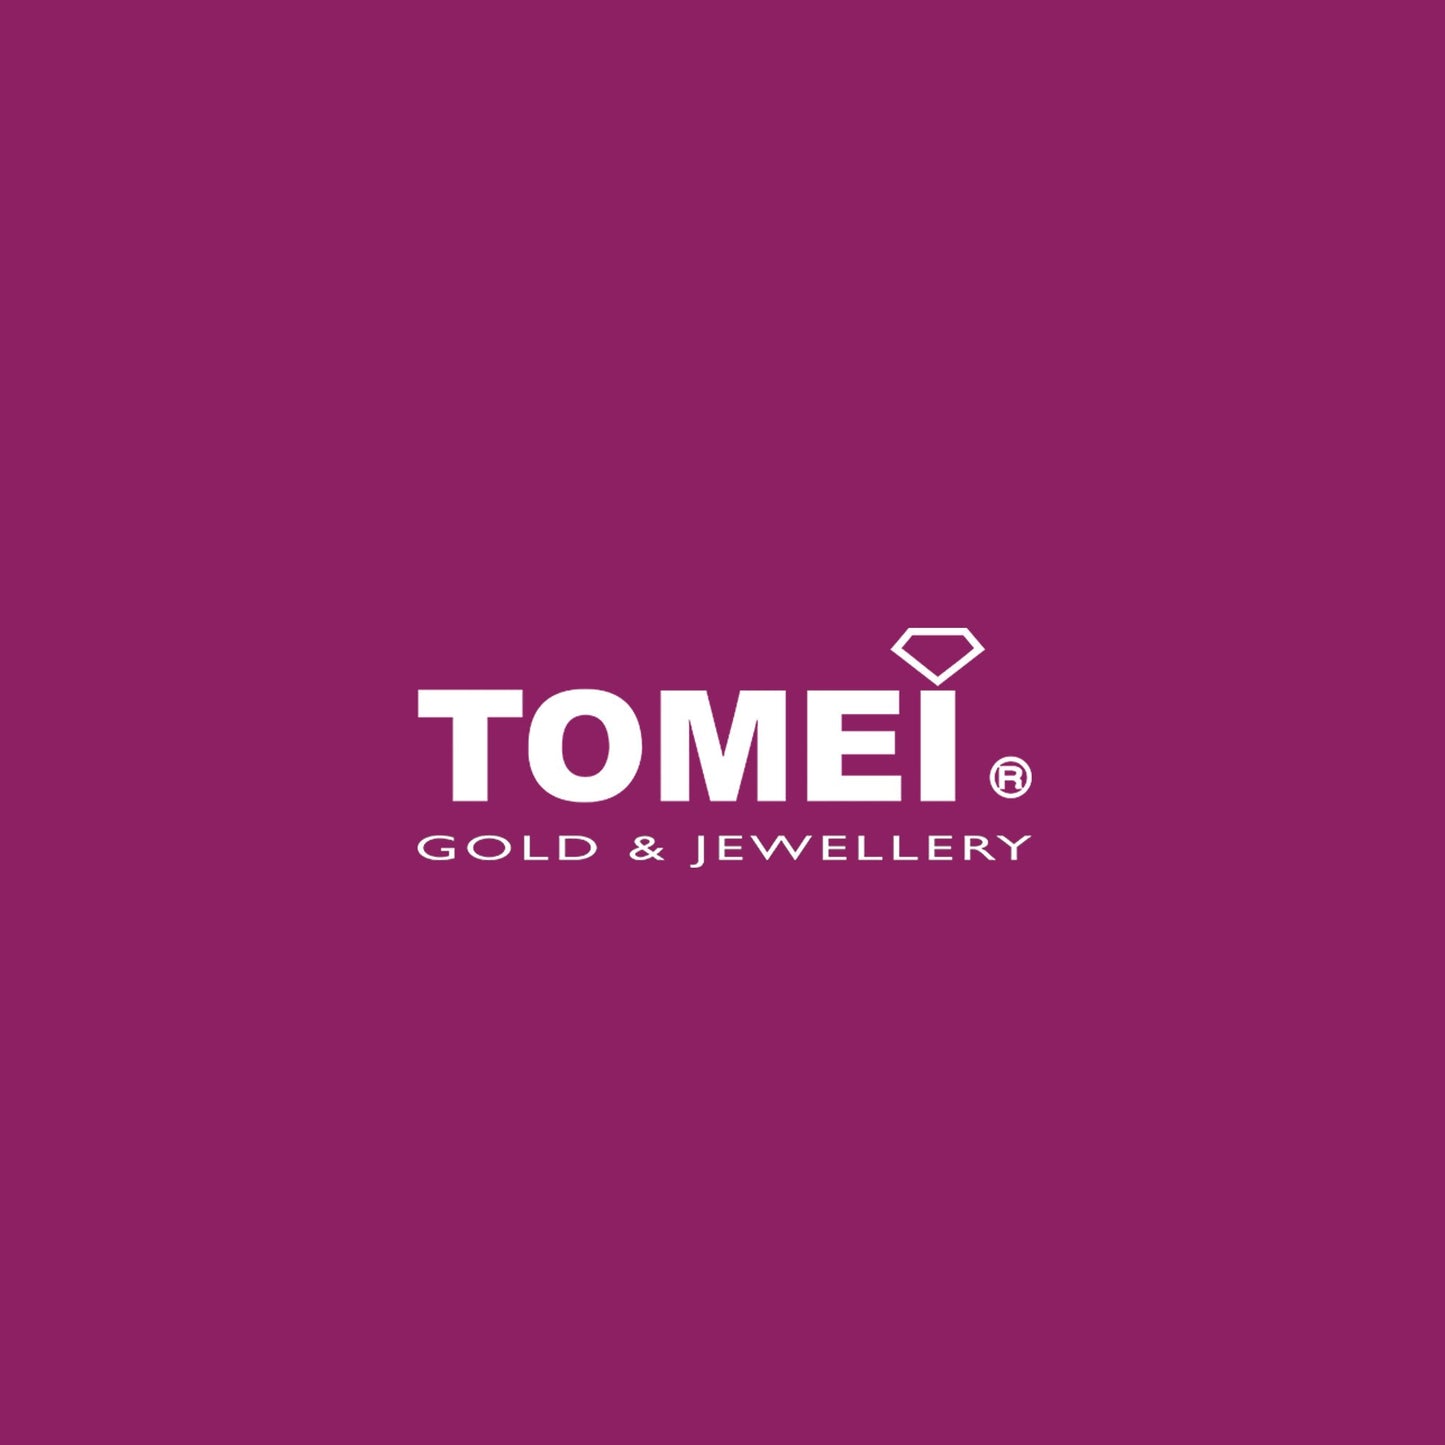 TOMEI Love Joins Us Together Ring, White Gold 585